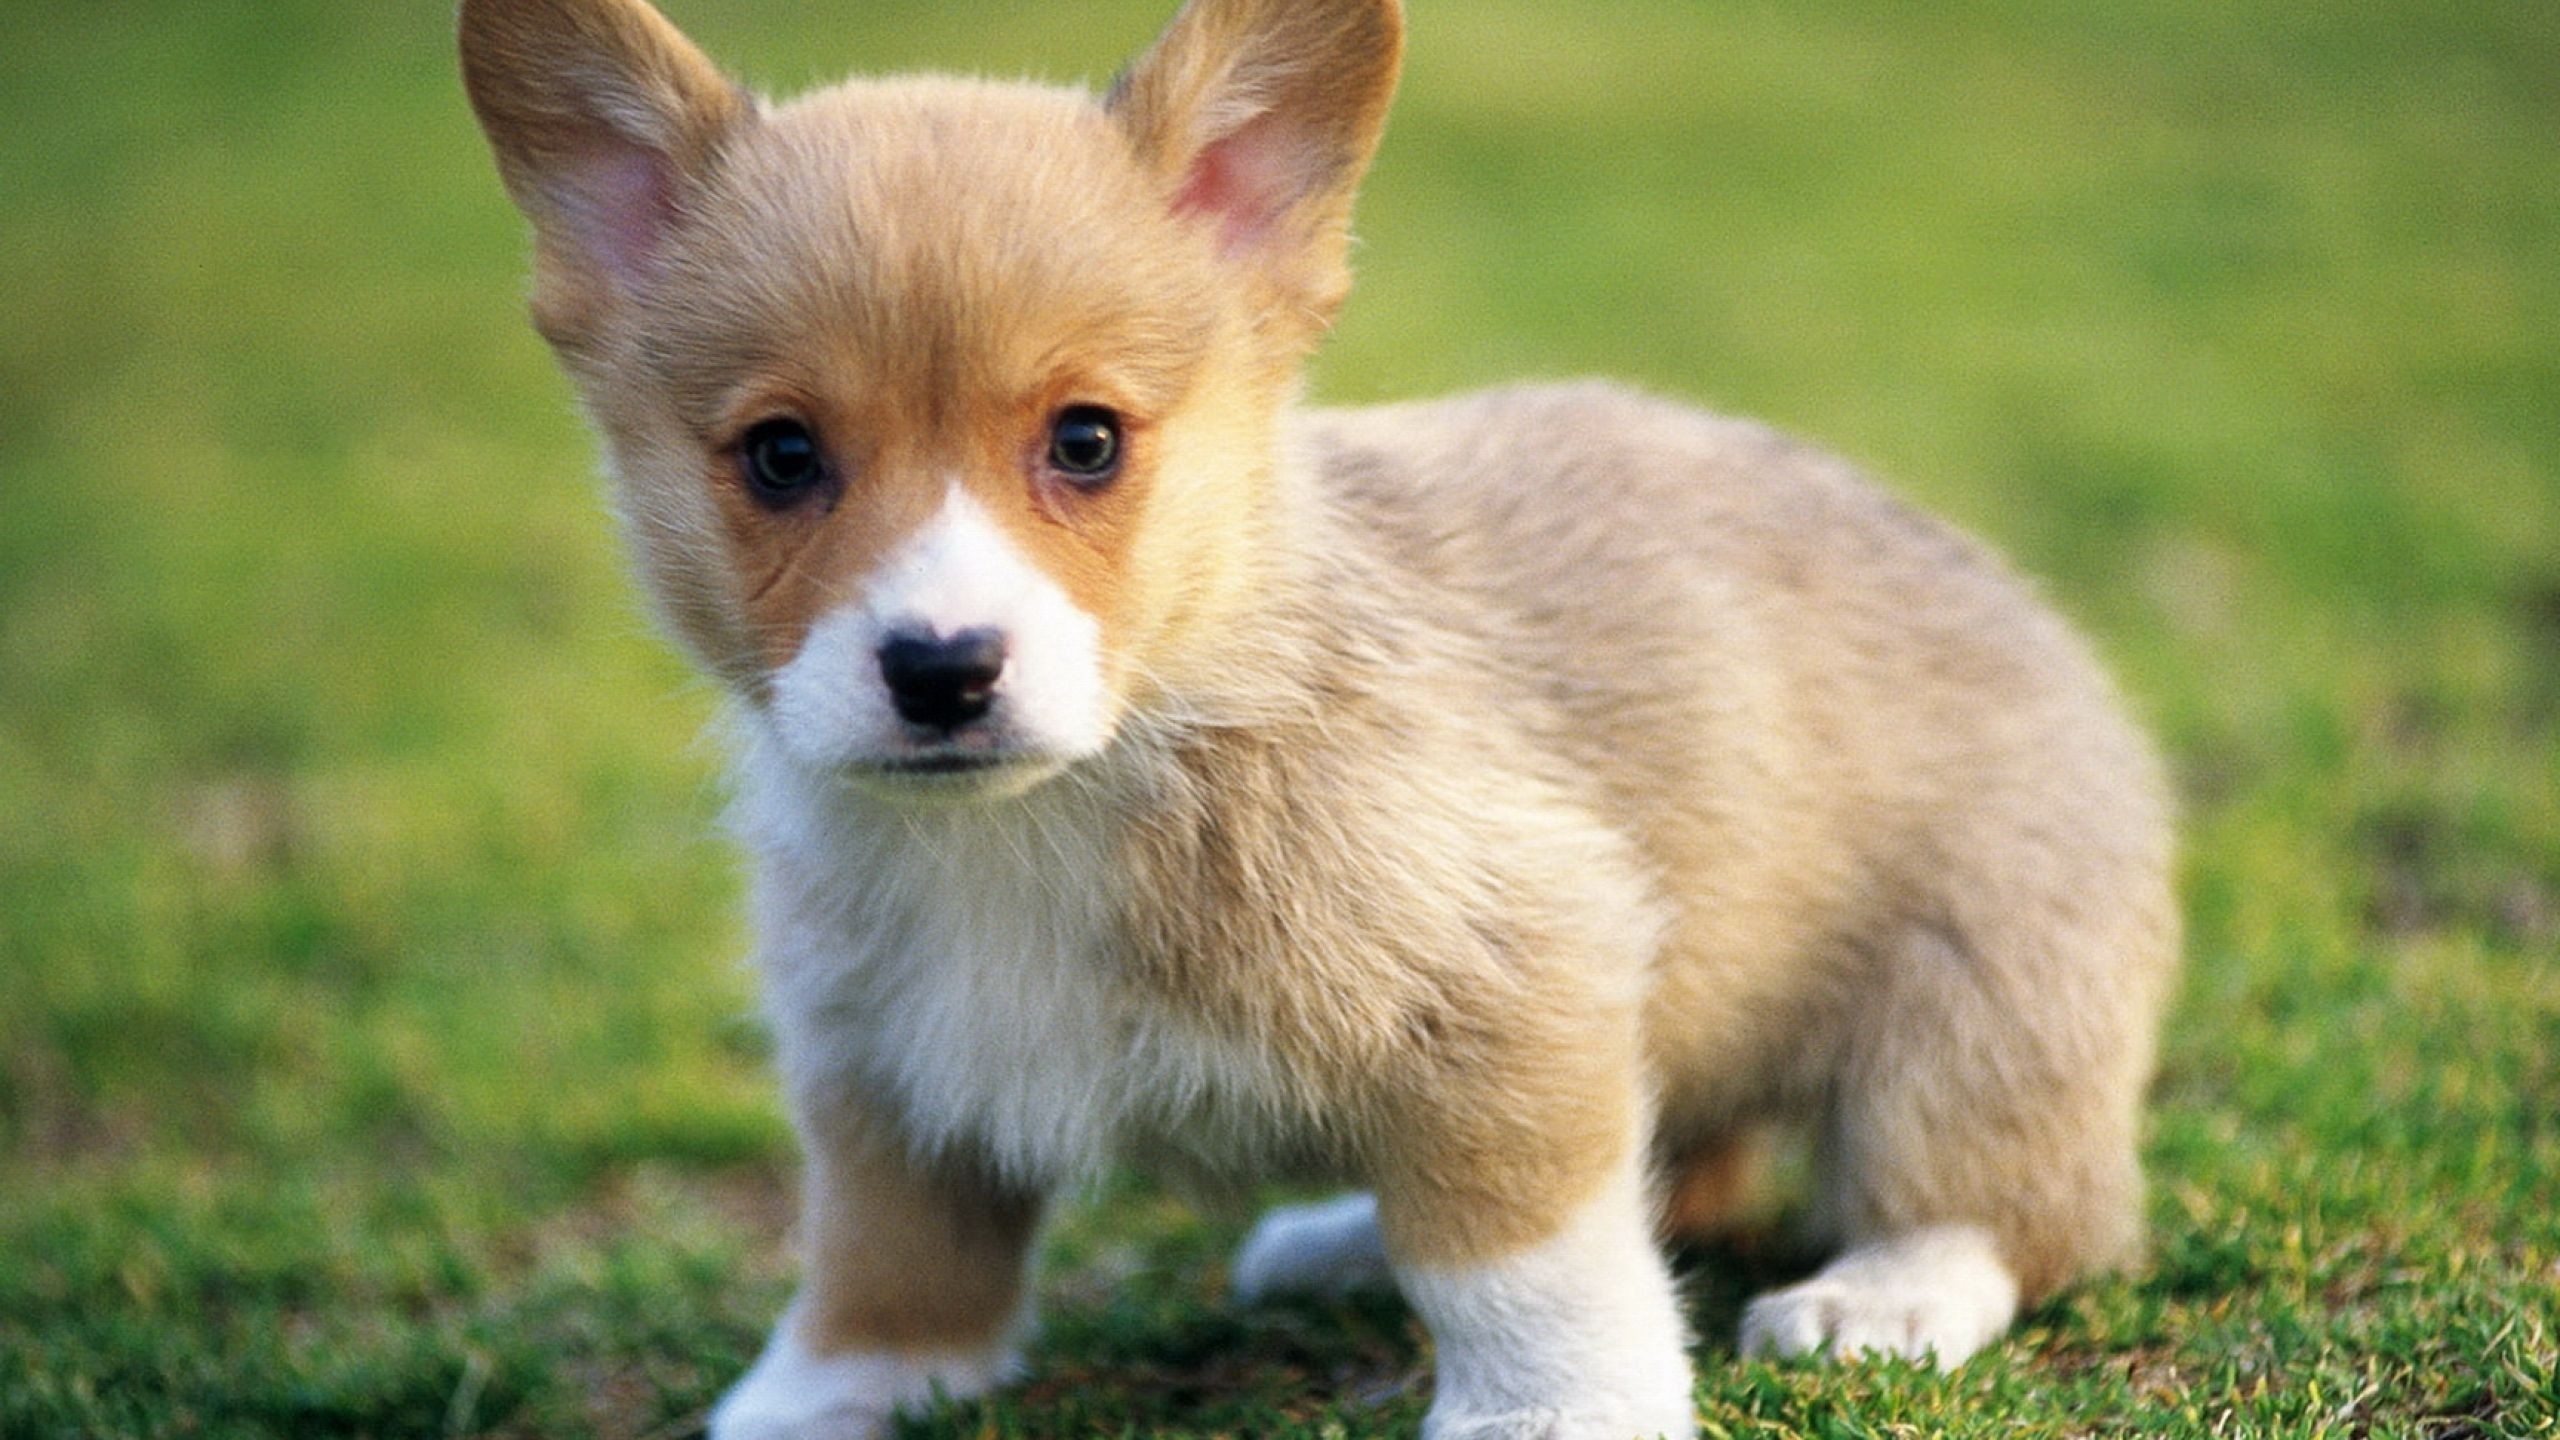 2560x1440 1920x1200 Free Puppy Wallpapers For Computer - Wallpaper Cave